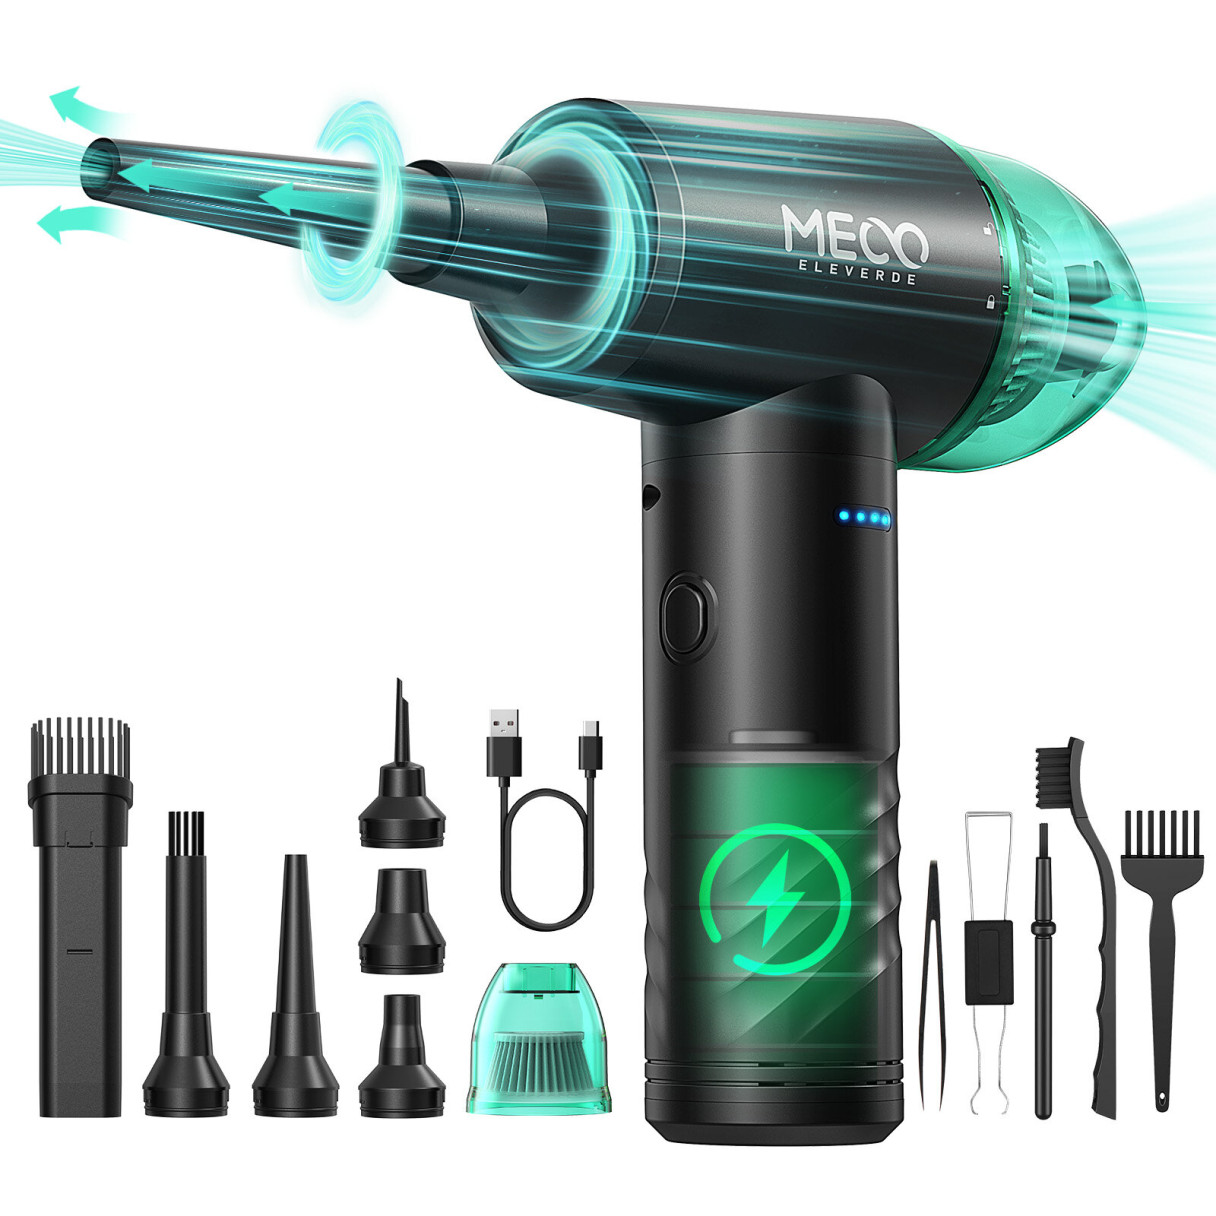 MECO ELEVERDE ME-CR1 Electric Compressed Air Duster & Vacuum Cleaner 4 in 1 Function Powerful 3-Gear to 90000RPM/12000PA Keyboard Cleaner, Rechargeable Cordless Air Duster for Computer/Car/Pet Hair